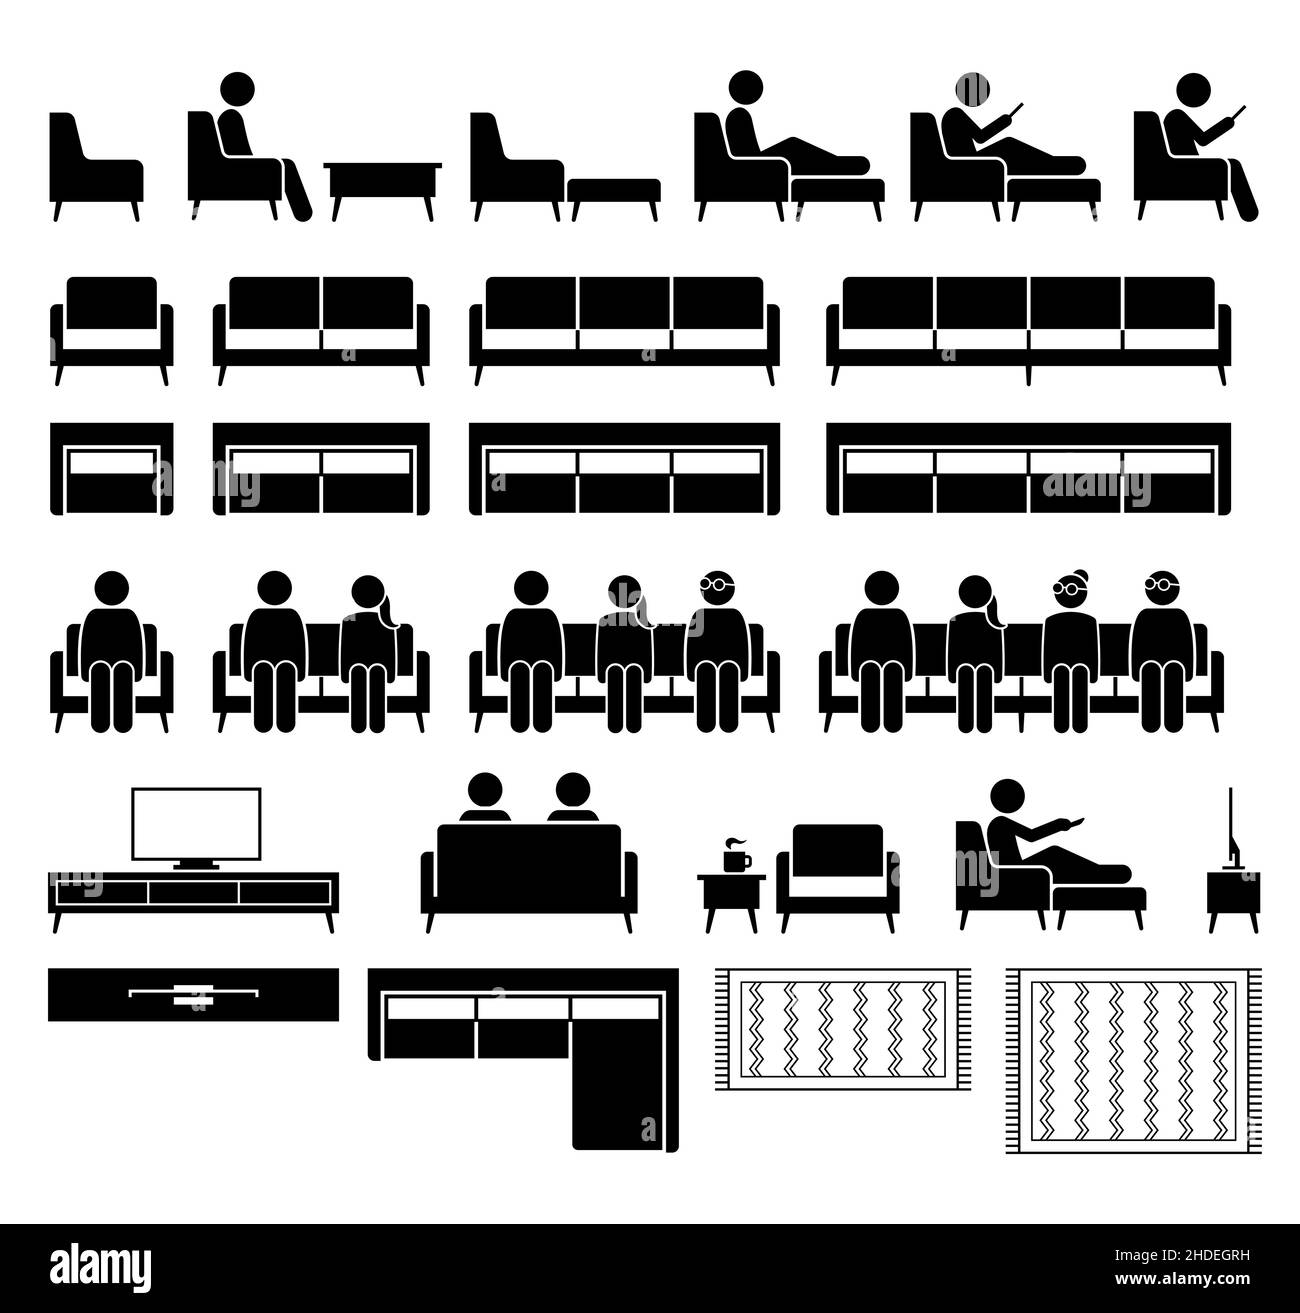 Sofa couch seating chair seater with people sitting. Vector illustrations icons pictogram of man and woman sitting on sofa and chair with footstool, c Stock Vector